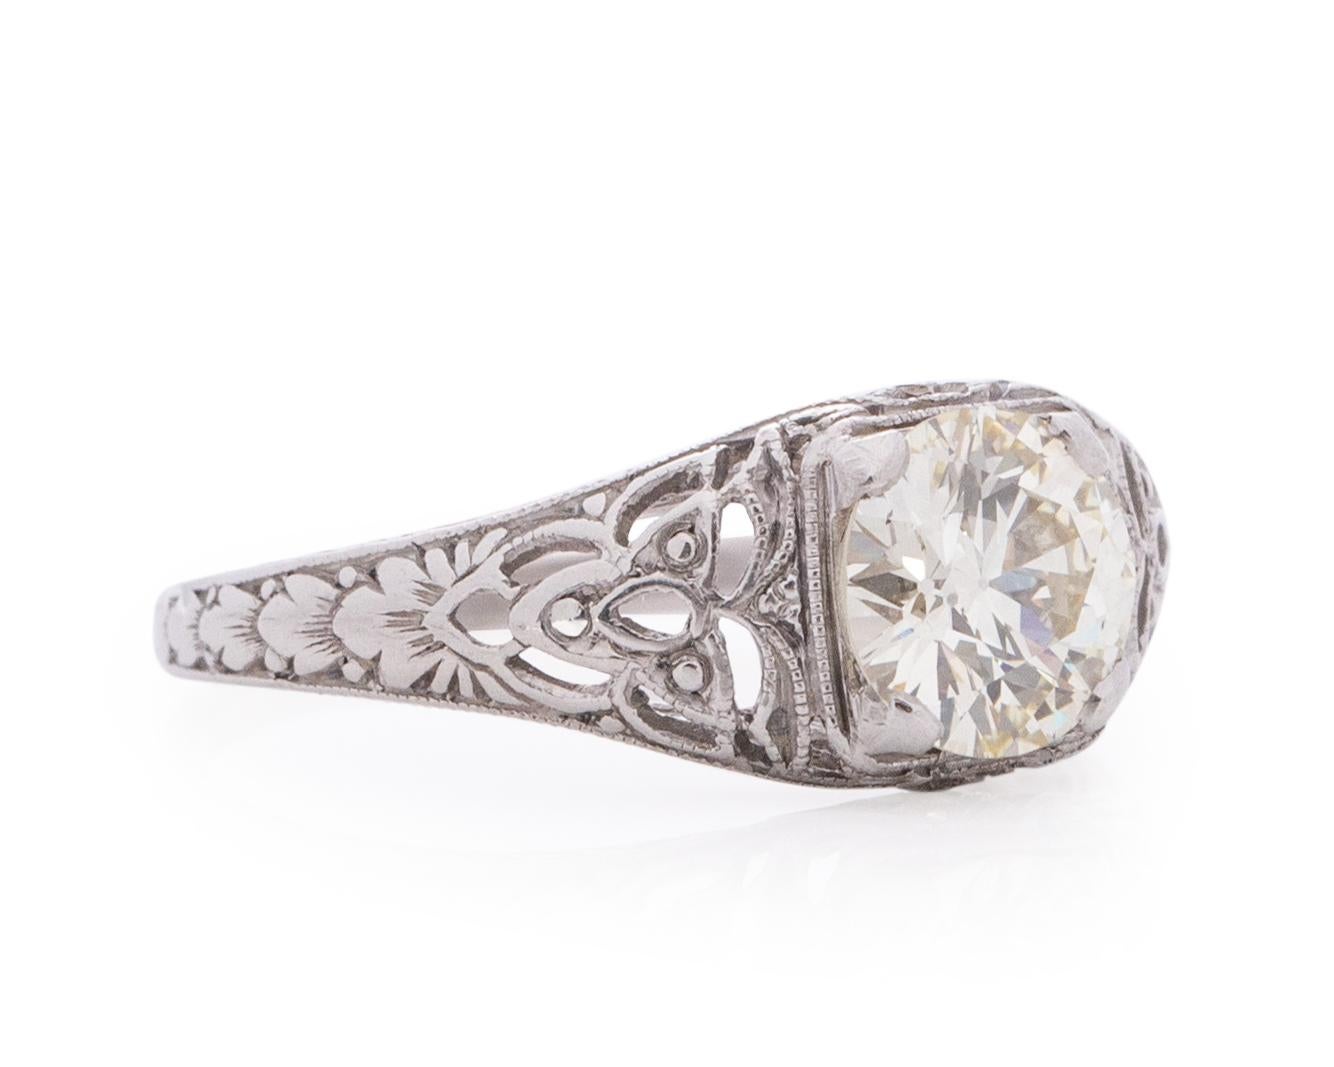 Item Details: 
Ring Size: 5.75
Metal Type: Platinum [Hallmarked, and Tested]
Weight: 3.0 grams

Center Diamond Details:
Weight: 1.02 carat
Cut: Old European Transitional brilliant
Color: Light Yellow (S/T)
Clarity: VS1
Measurements: 6.5mm x